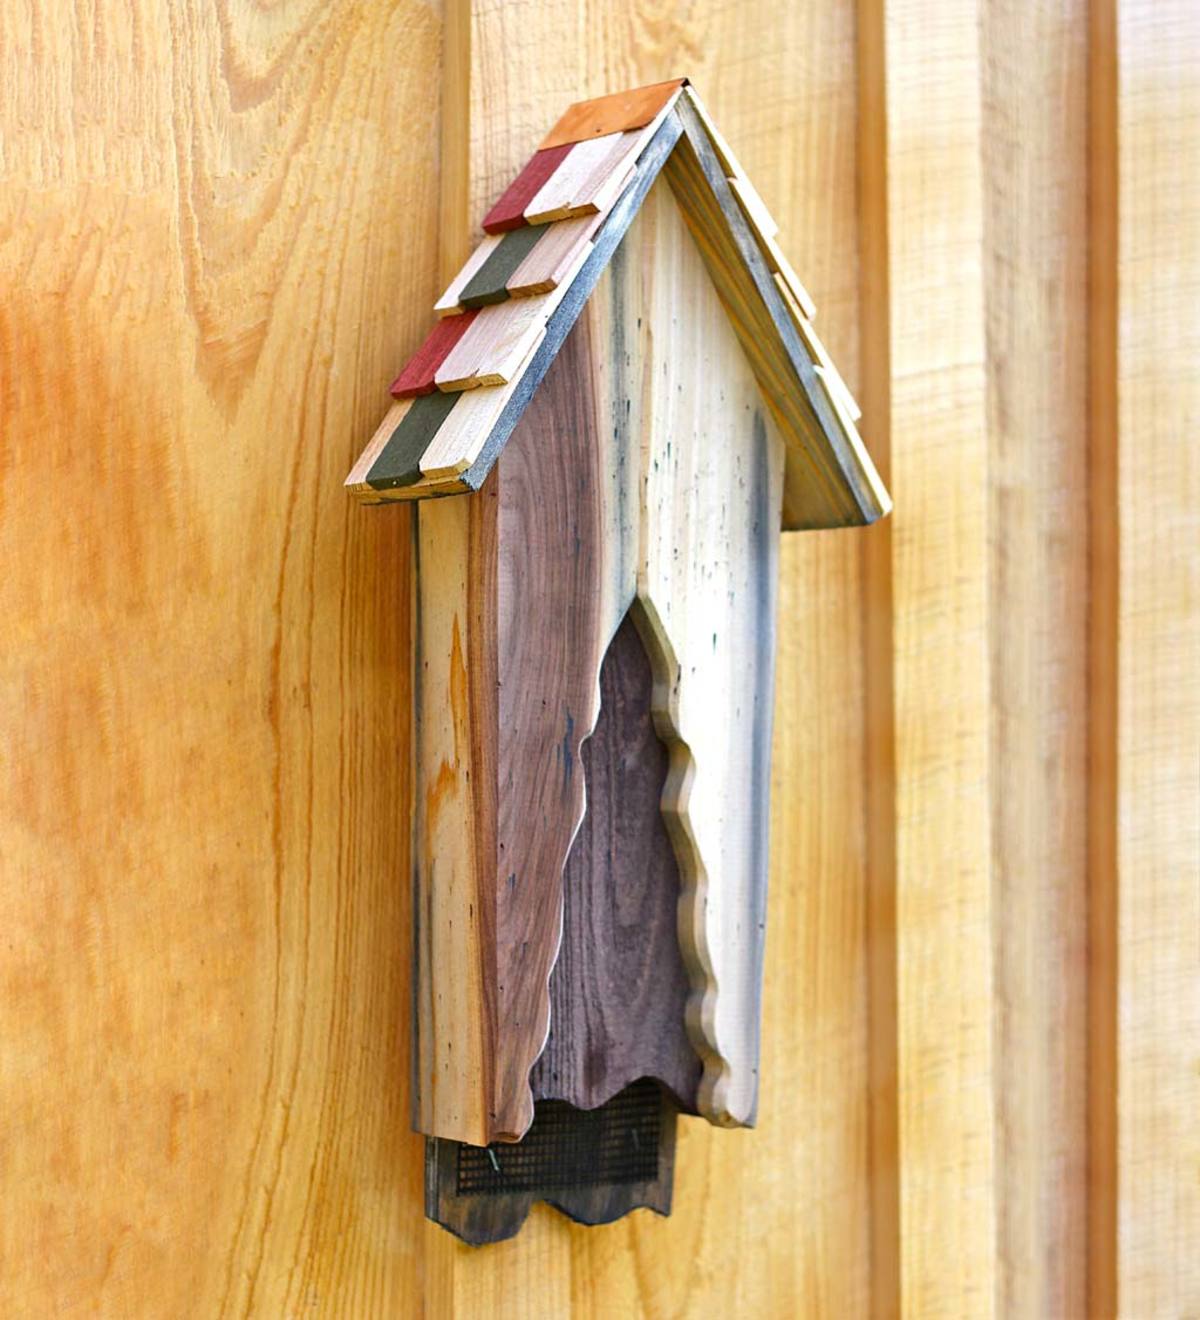 Handcrafted Vintage-Style Wood Bat House